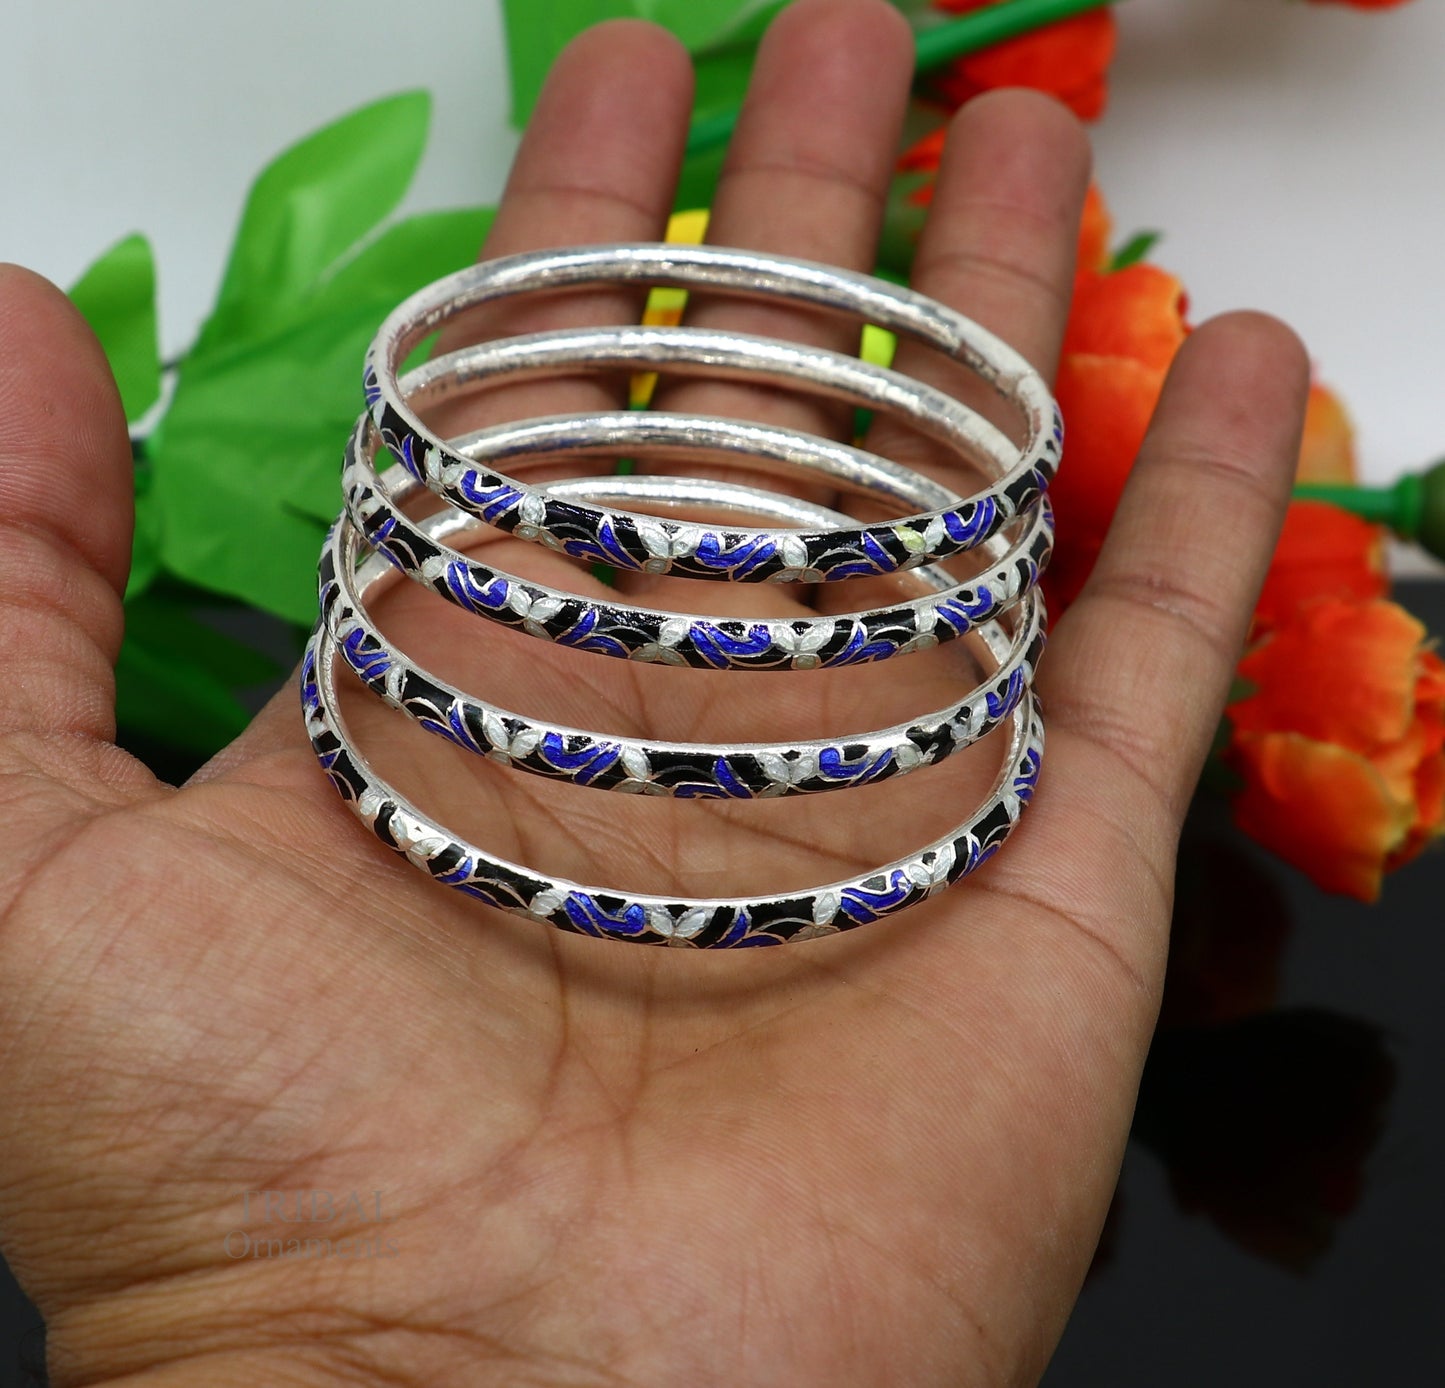 925 sterling silver handcrafted color enamel 4 pieces bangles bracelet, best brides jewelry vintage antique style wrist jewelry nba284 - TRIBAL ORNAMENTS